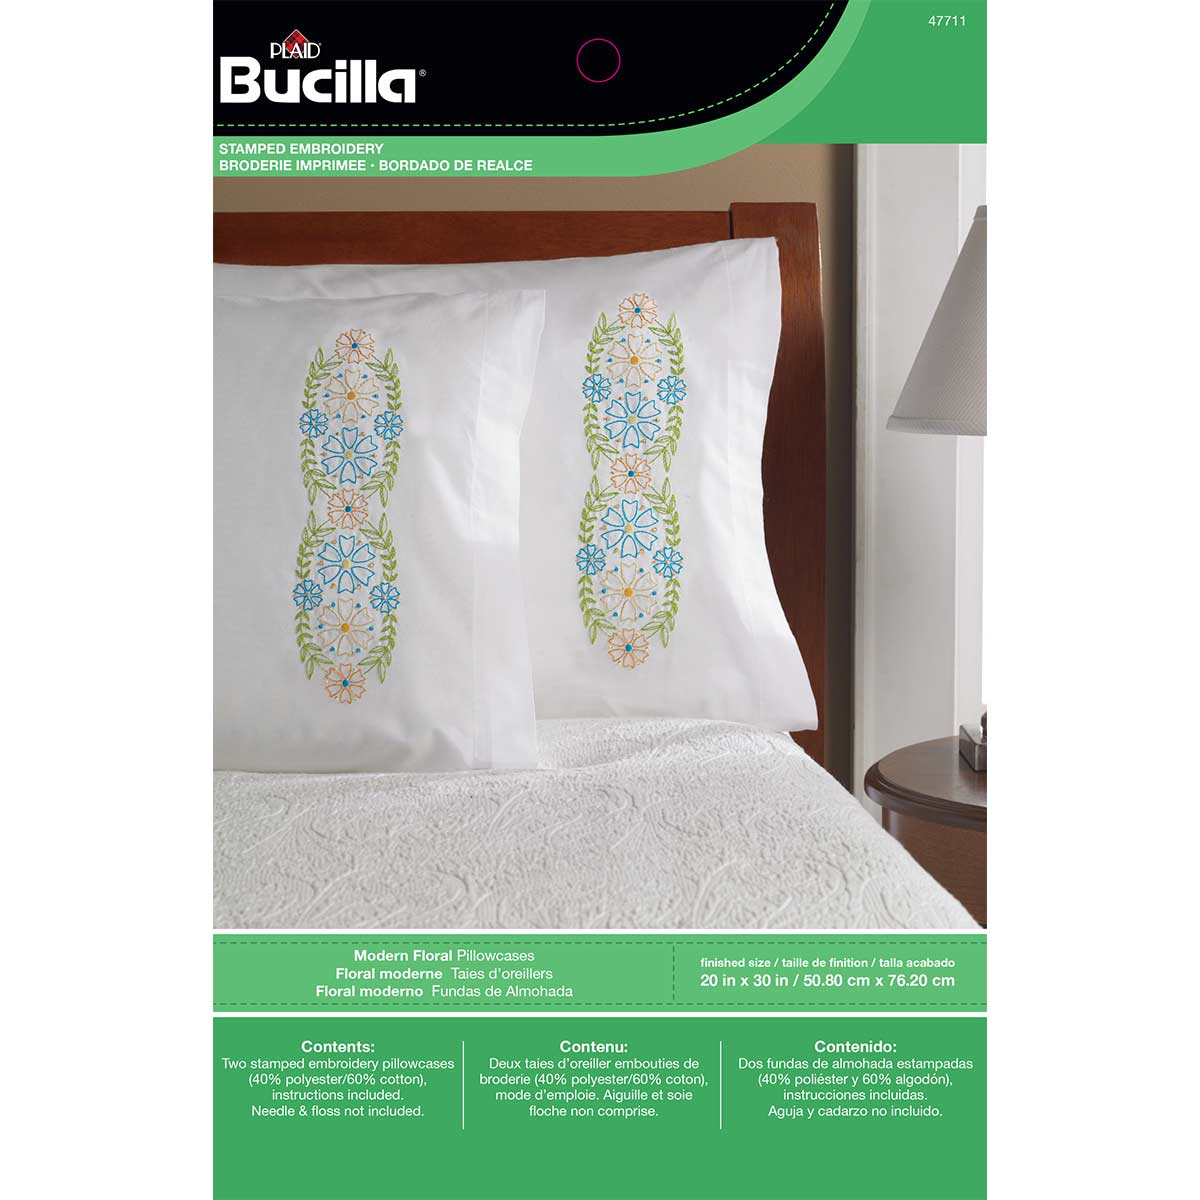 Bucilla ® Stamped Cross Stitch & Embroidery - Pillowcase Pairs - Modern Floral